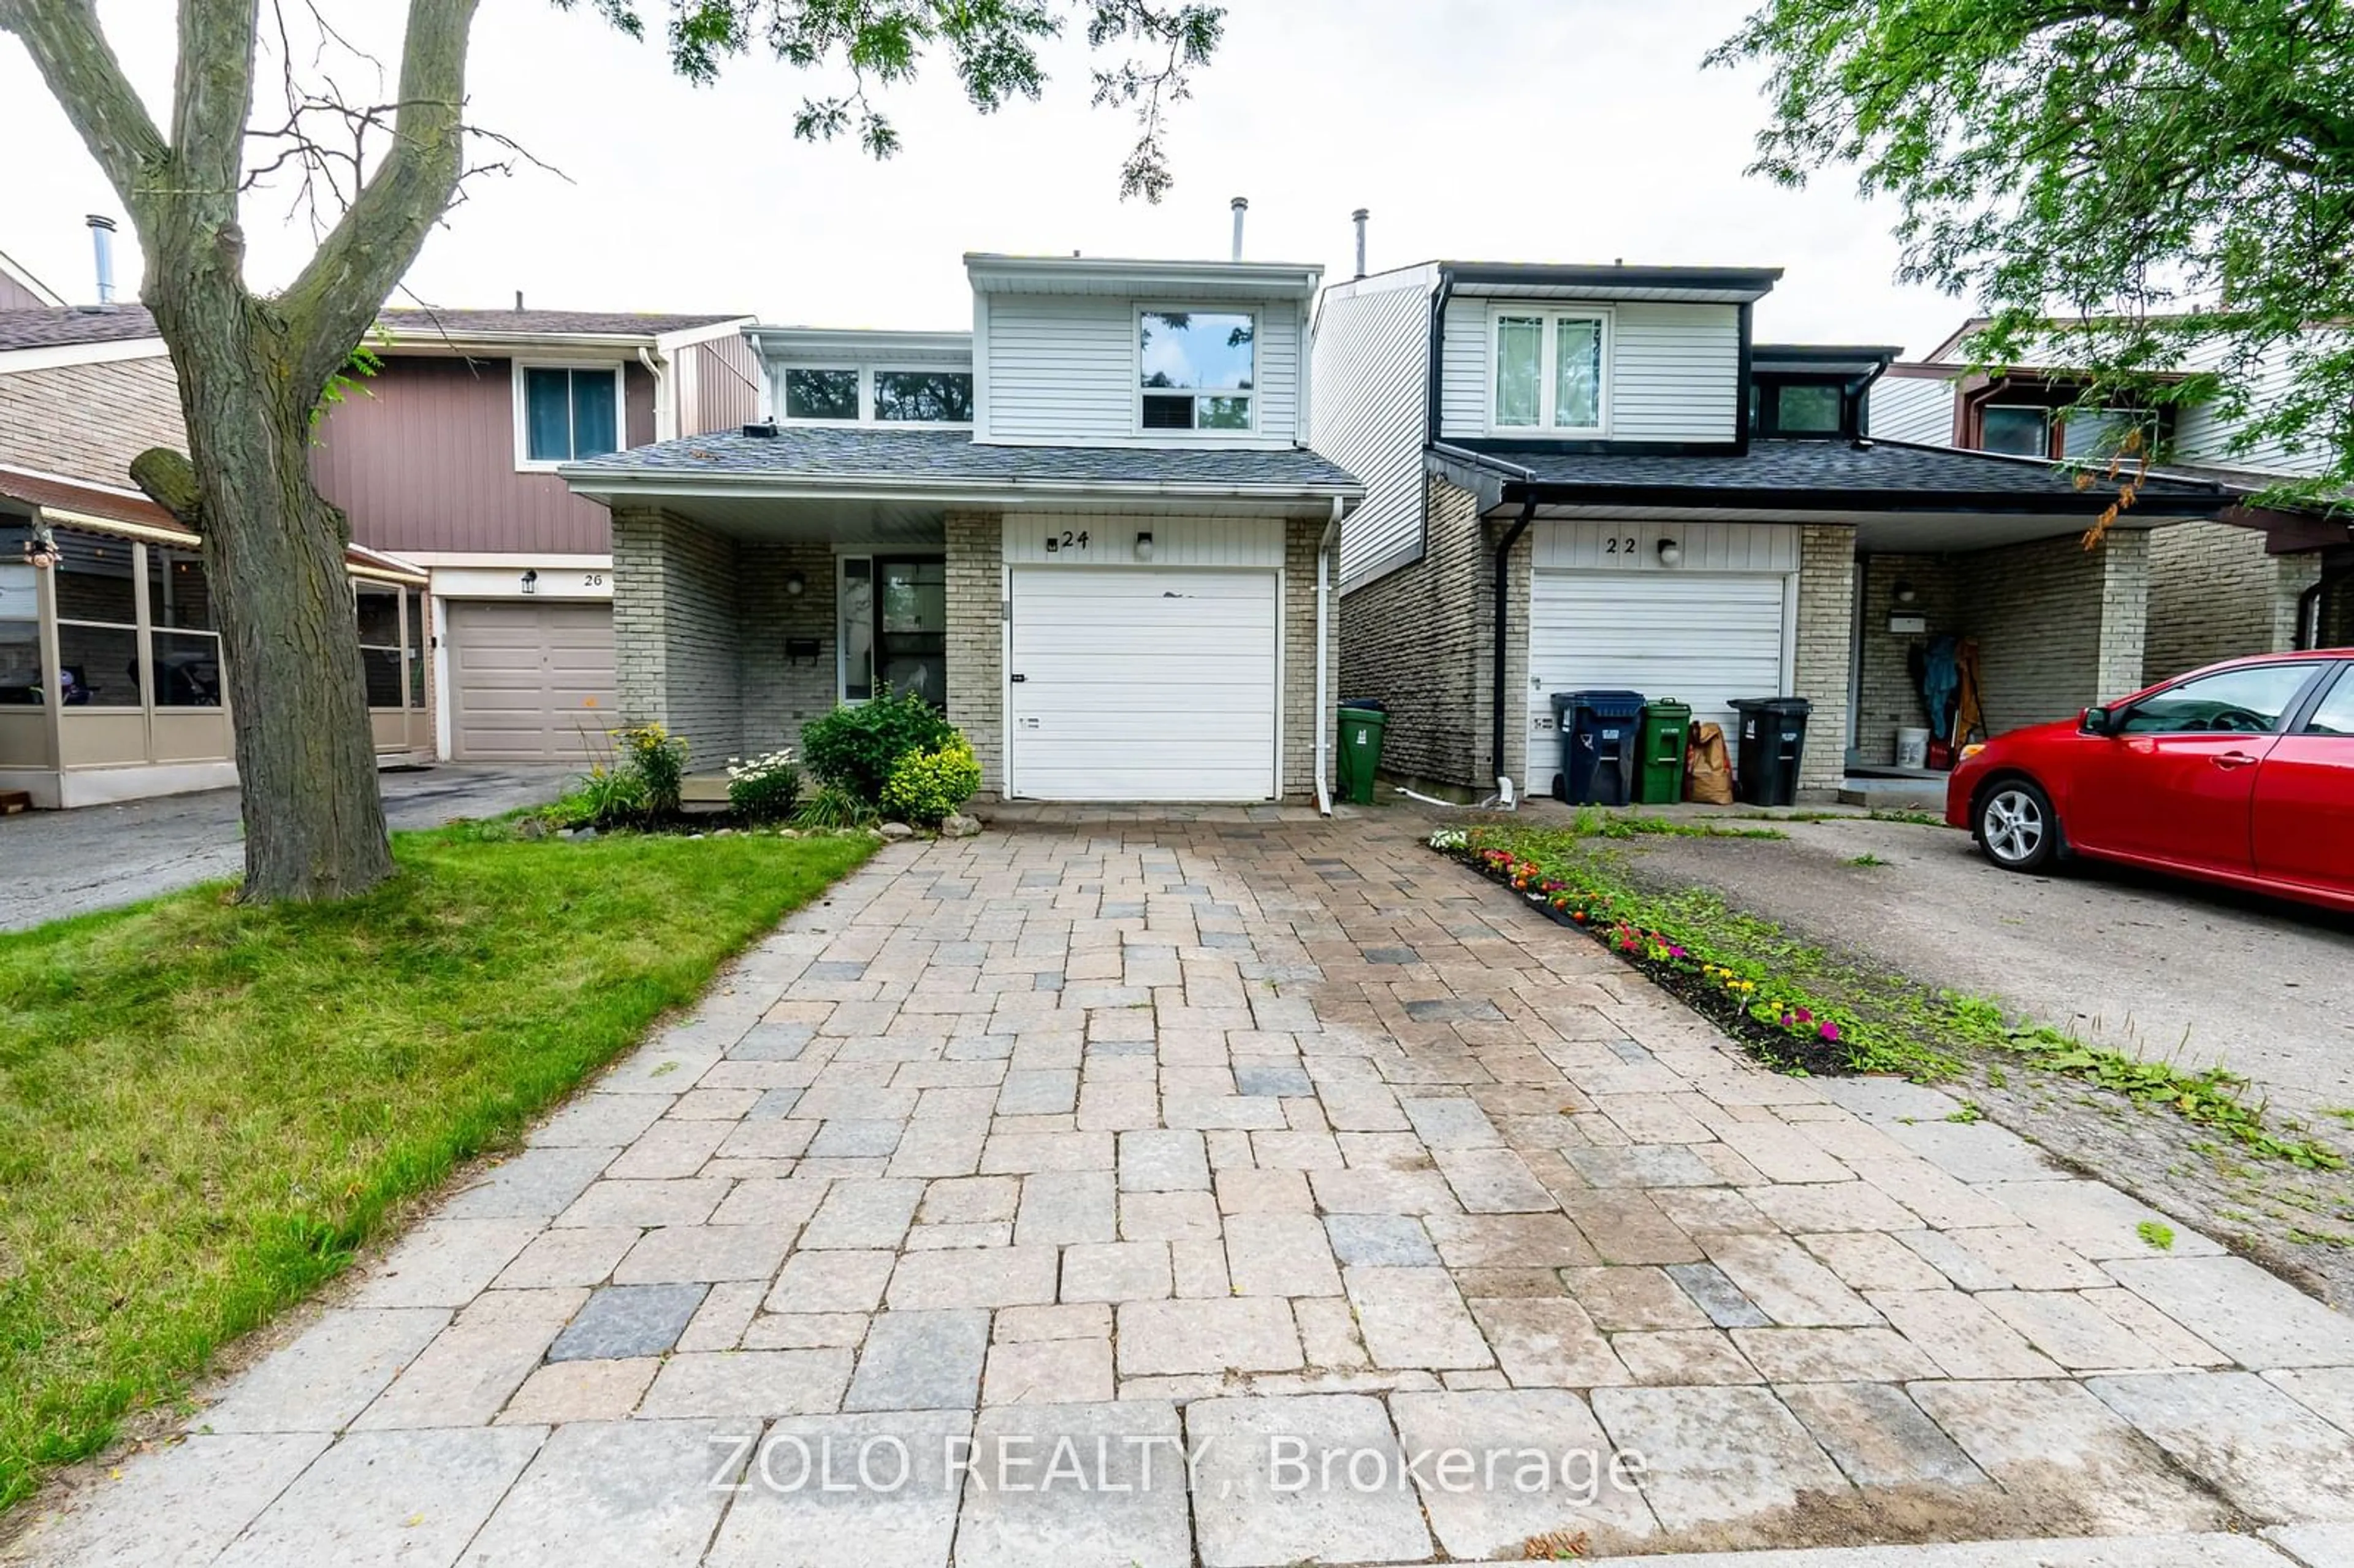 A pic from exterior of the house or condo for 24 Wallis Cres, Toronto Ontario M9V 4K3